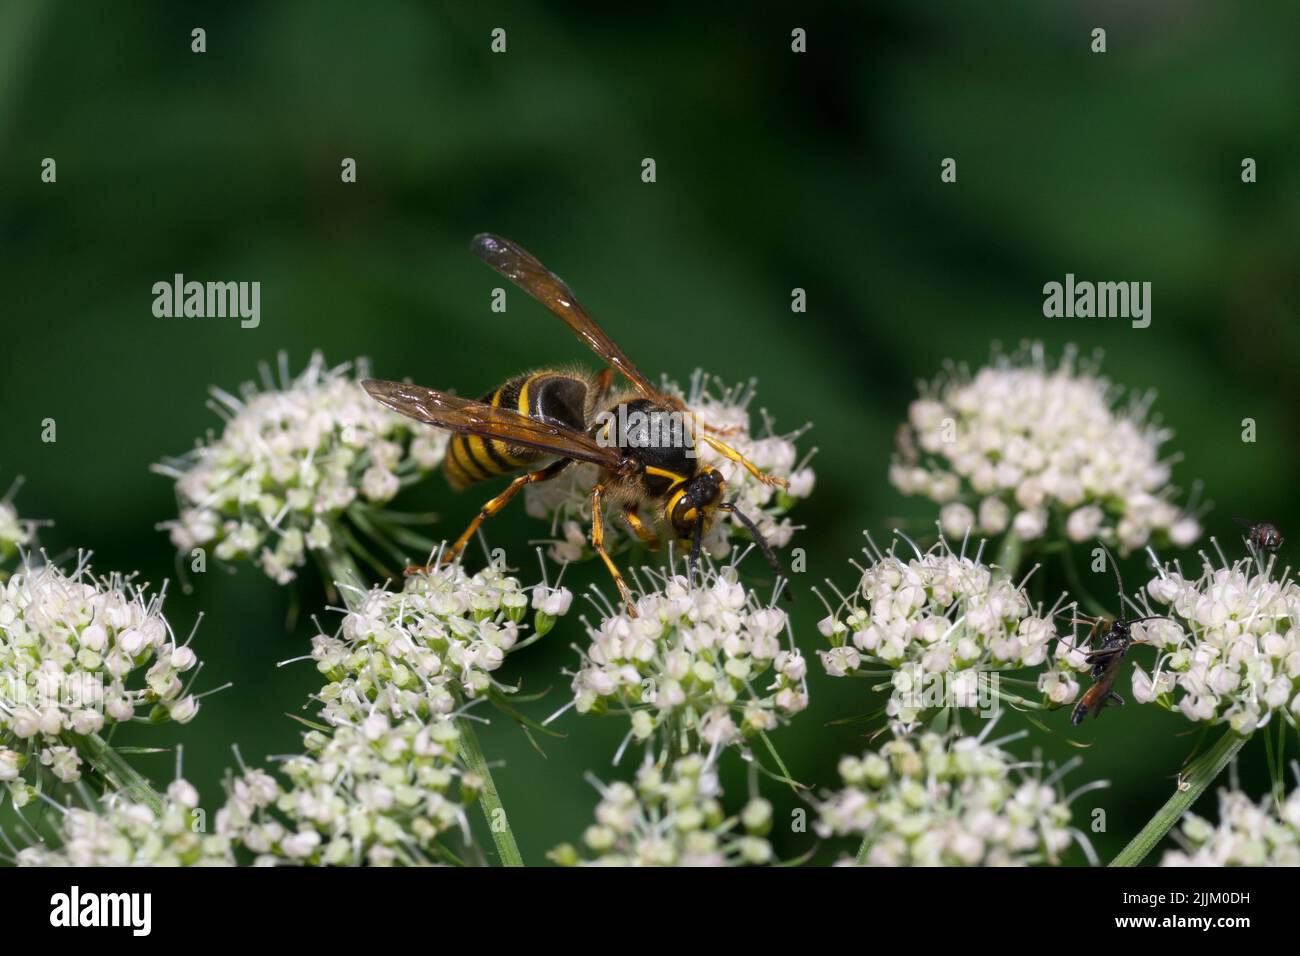 A photo of an Asian hornet insect on a maple-leaved viburnum plant Stock Photo